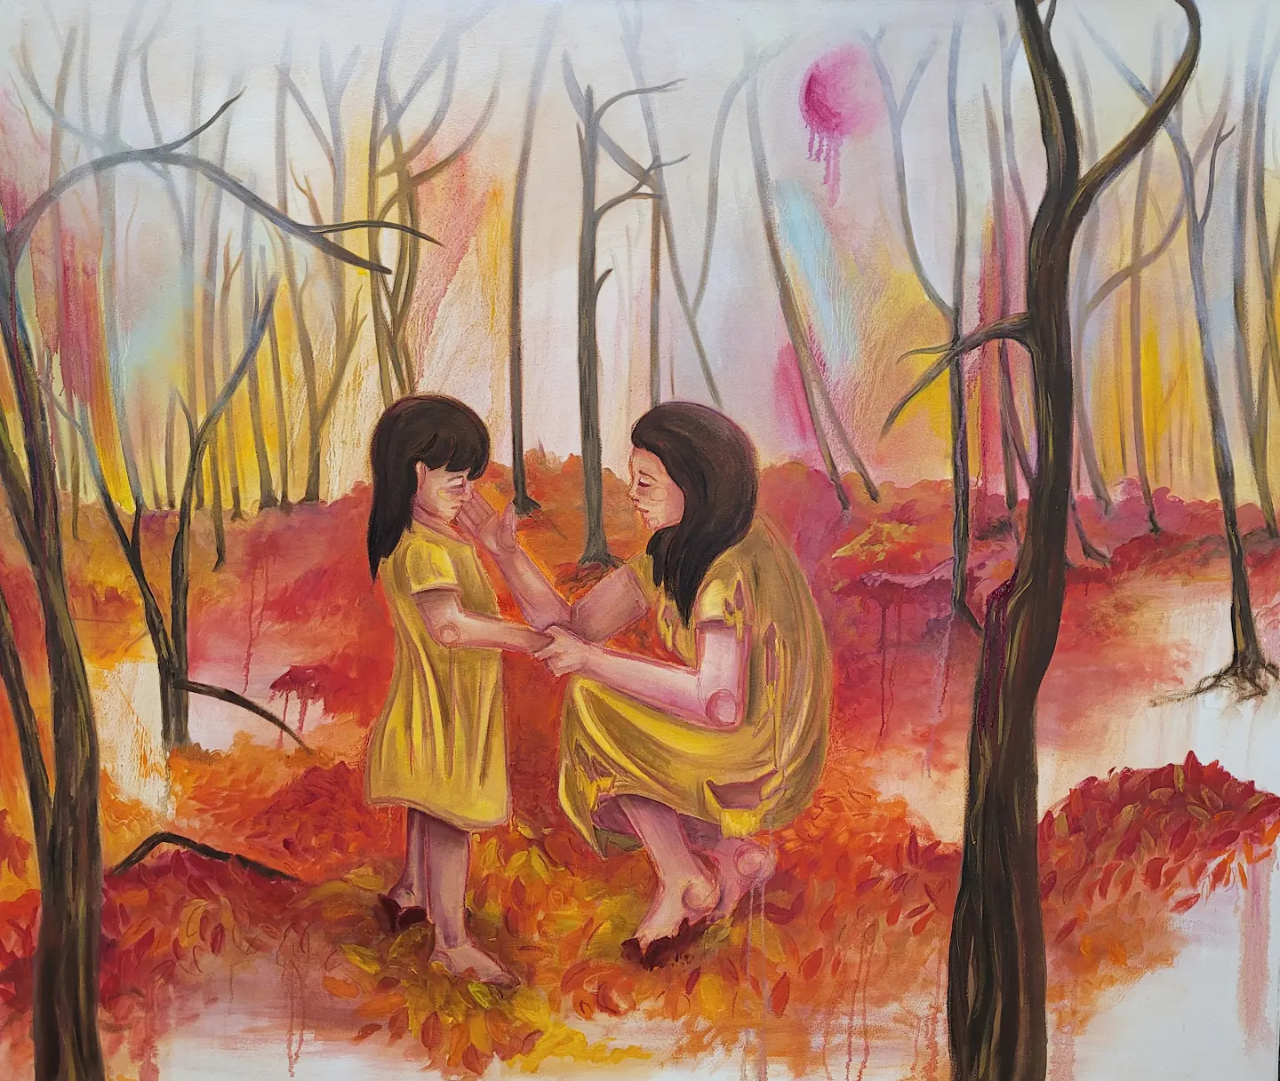 a little girl with brown hair and a yellow dress stands barefoot in a forest, looking a little sad or scared, while a brown-haired adult woman in a matching yellow dress crouches down to comfort the girl. She is also barefoot and is holding one of the girl’s hands and touching the girl’s face with her other hand. They are standing in a forest setting of red, yellow and orange leaves on the ground and bare trees in the background.